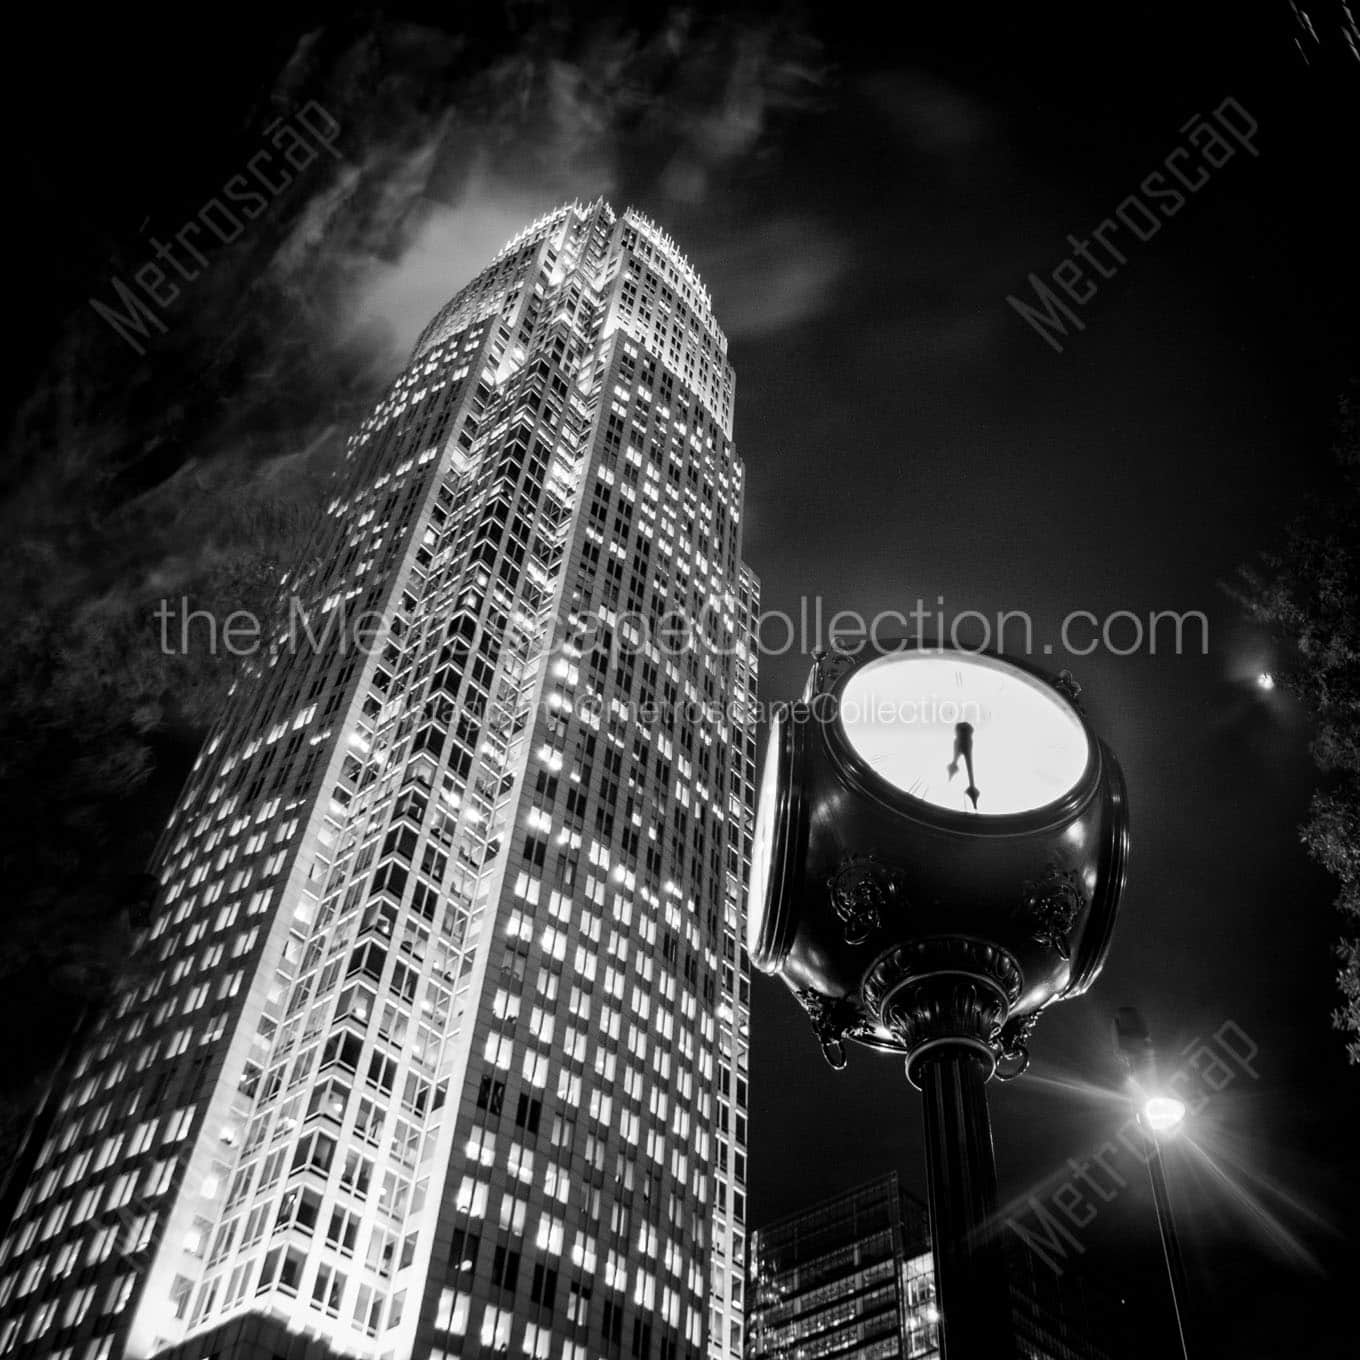 bank of america building night downtown charlotte Black & White Office Art